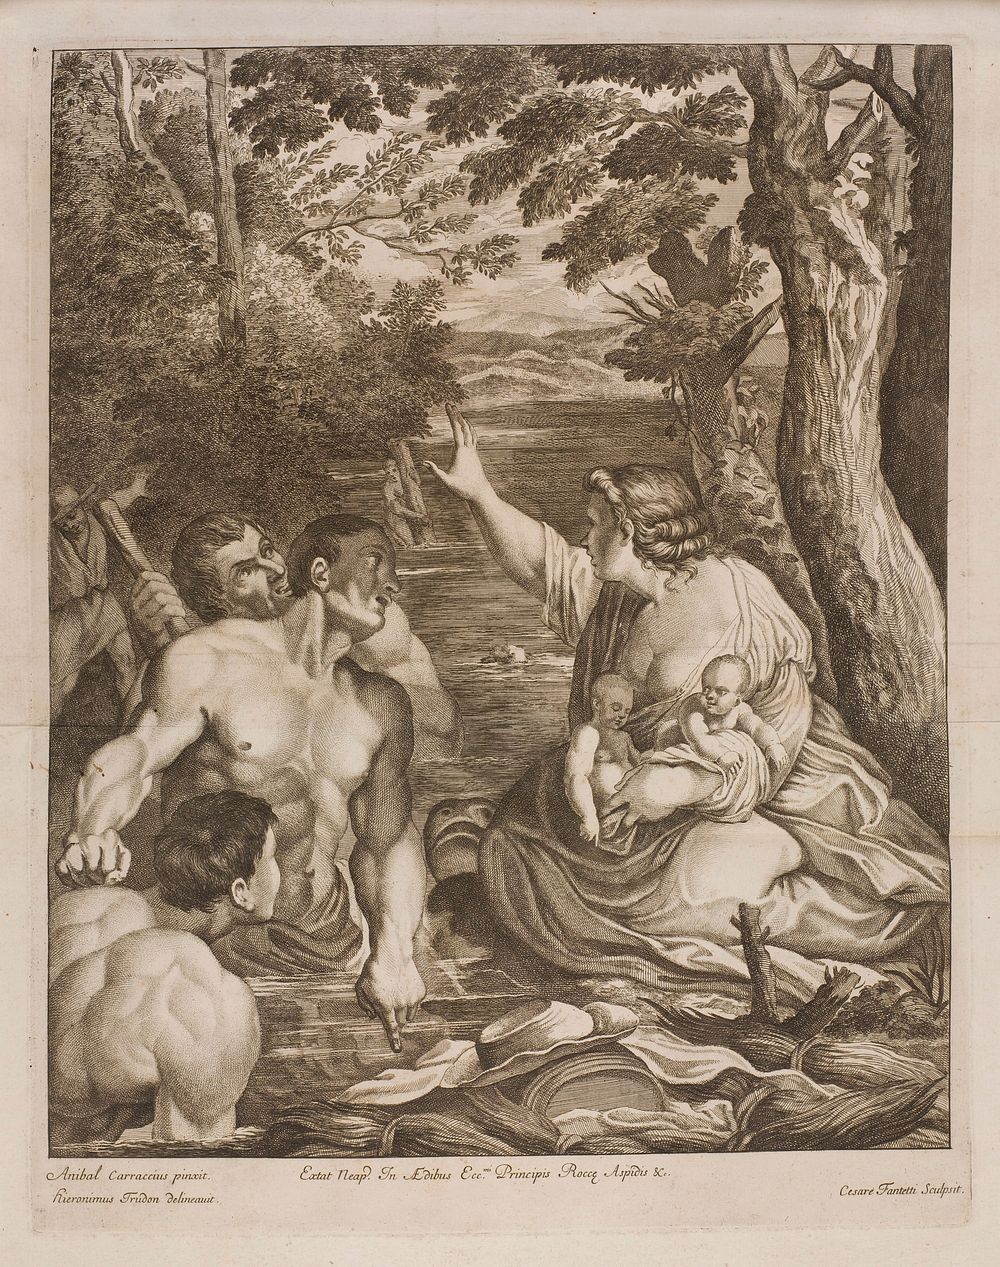 A woman rescuing twin babies from a river. Engraving by C. Fantetti after Hieronymus Trudon after Annibale Carracci.